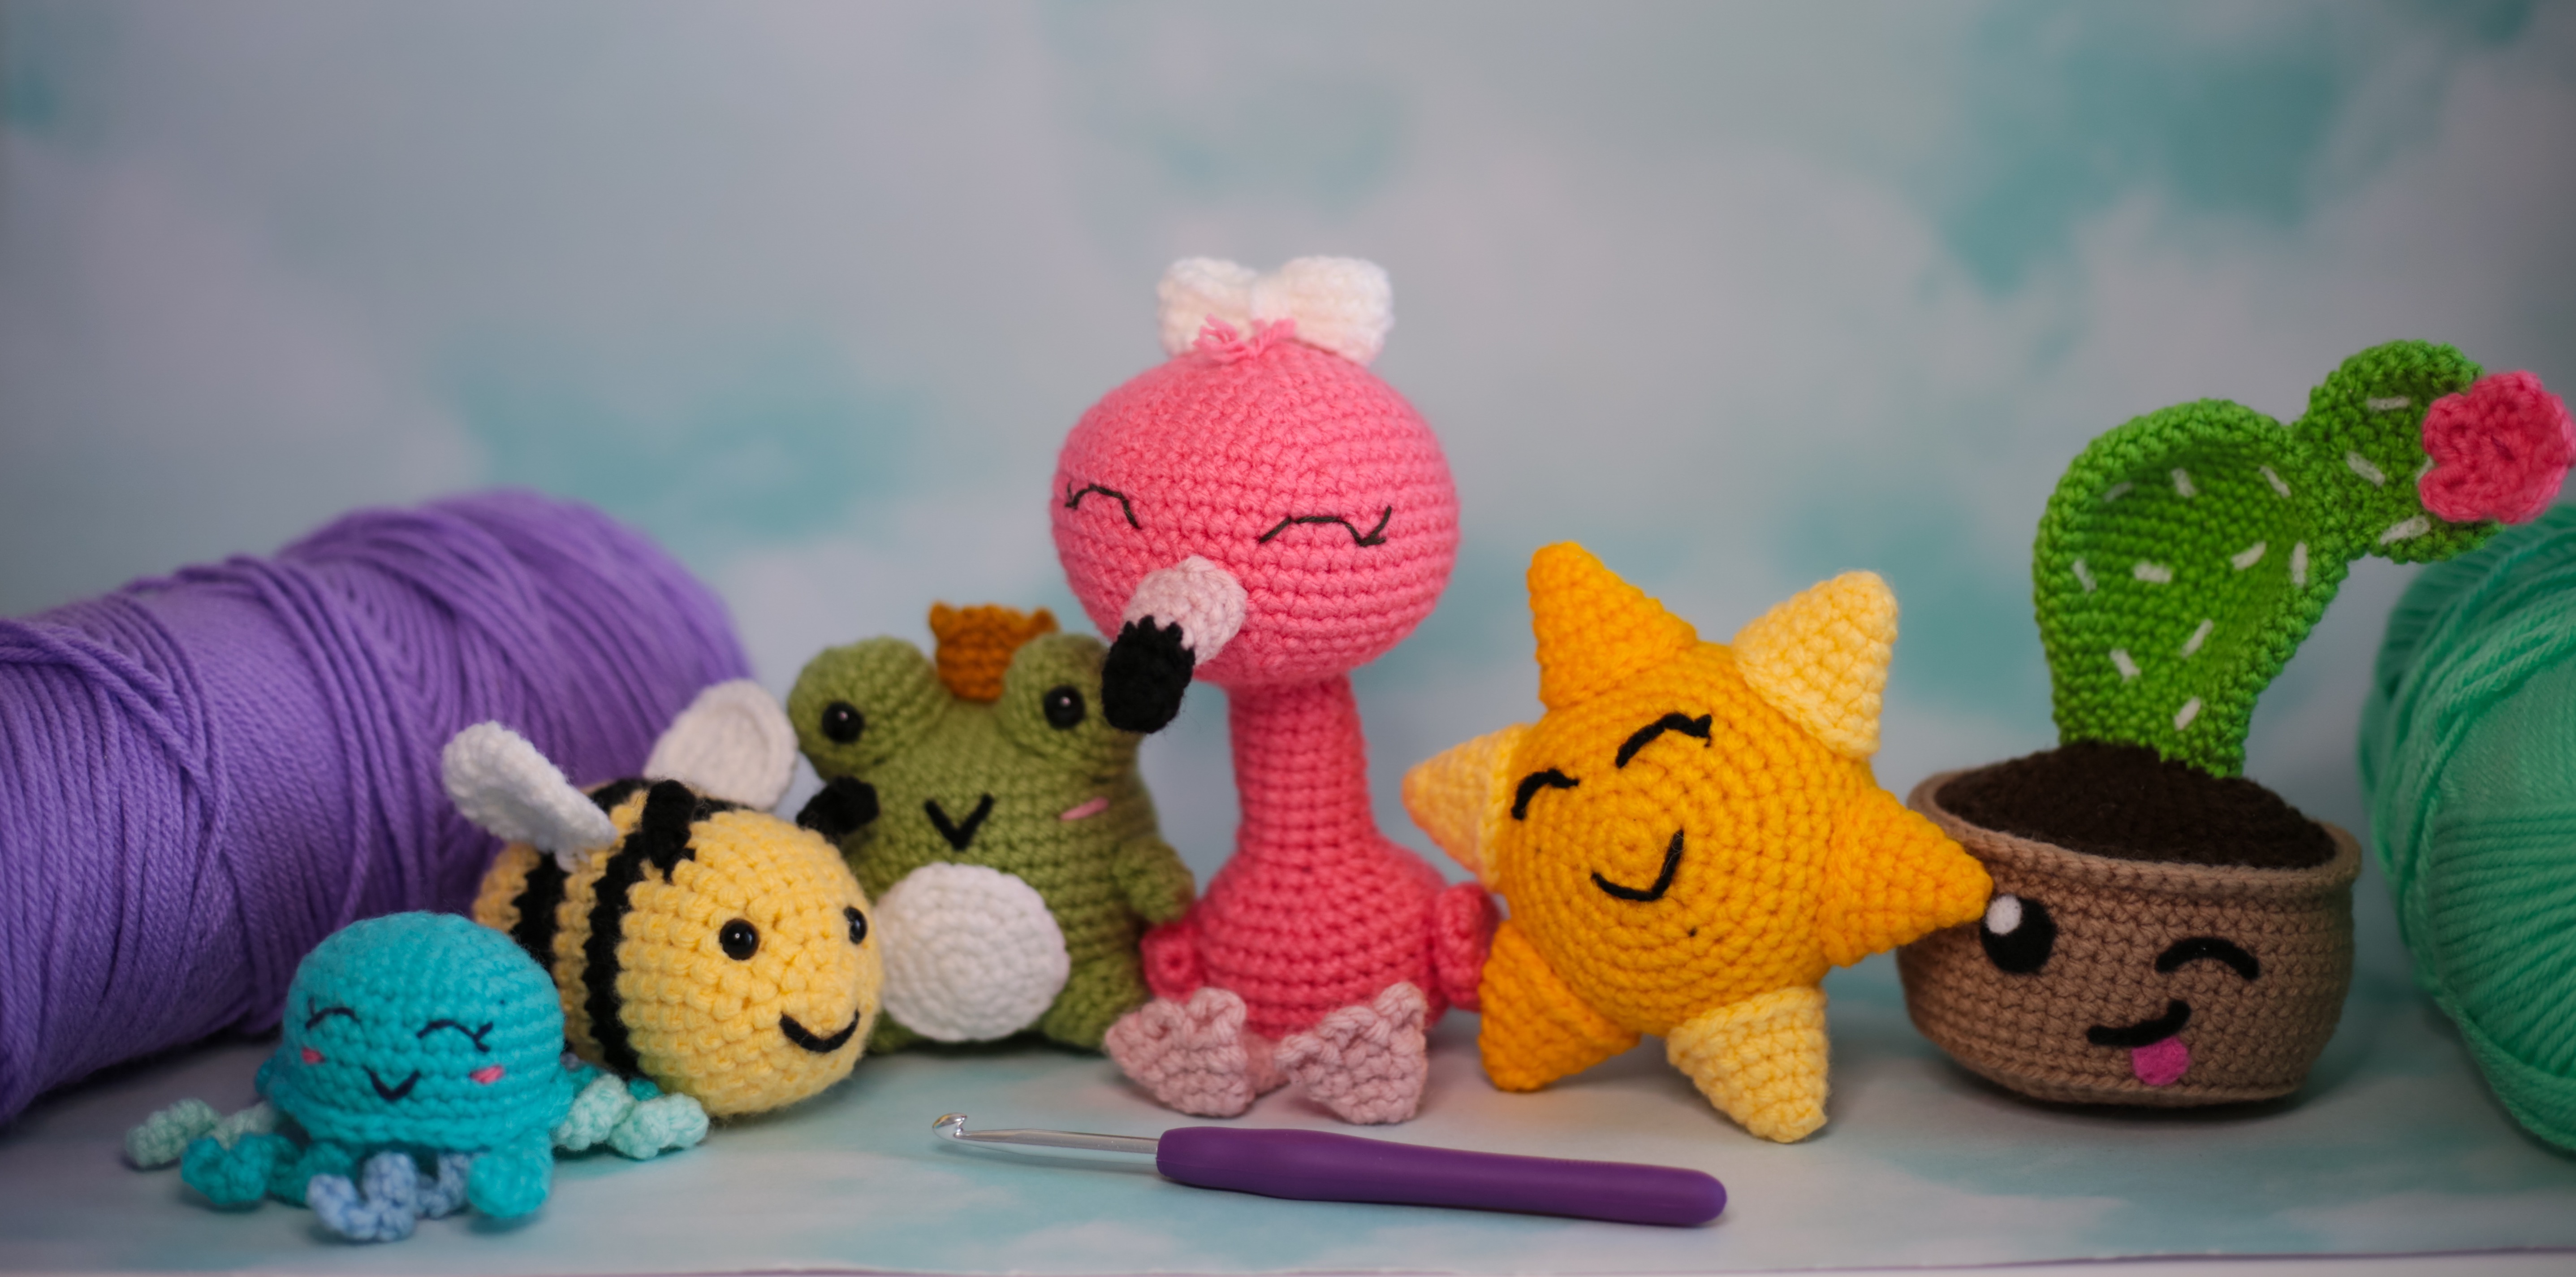 Free Course: How to Crochet for ABSOLUTE BEGINNERS - Basic Crochet Stitches  Tutorial from